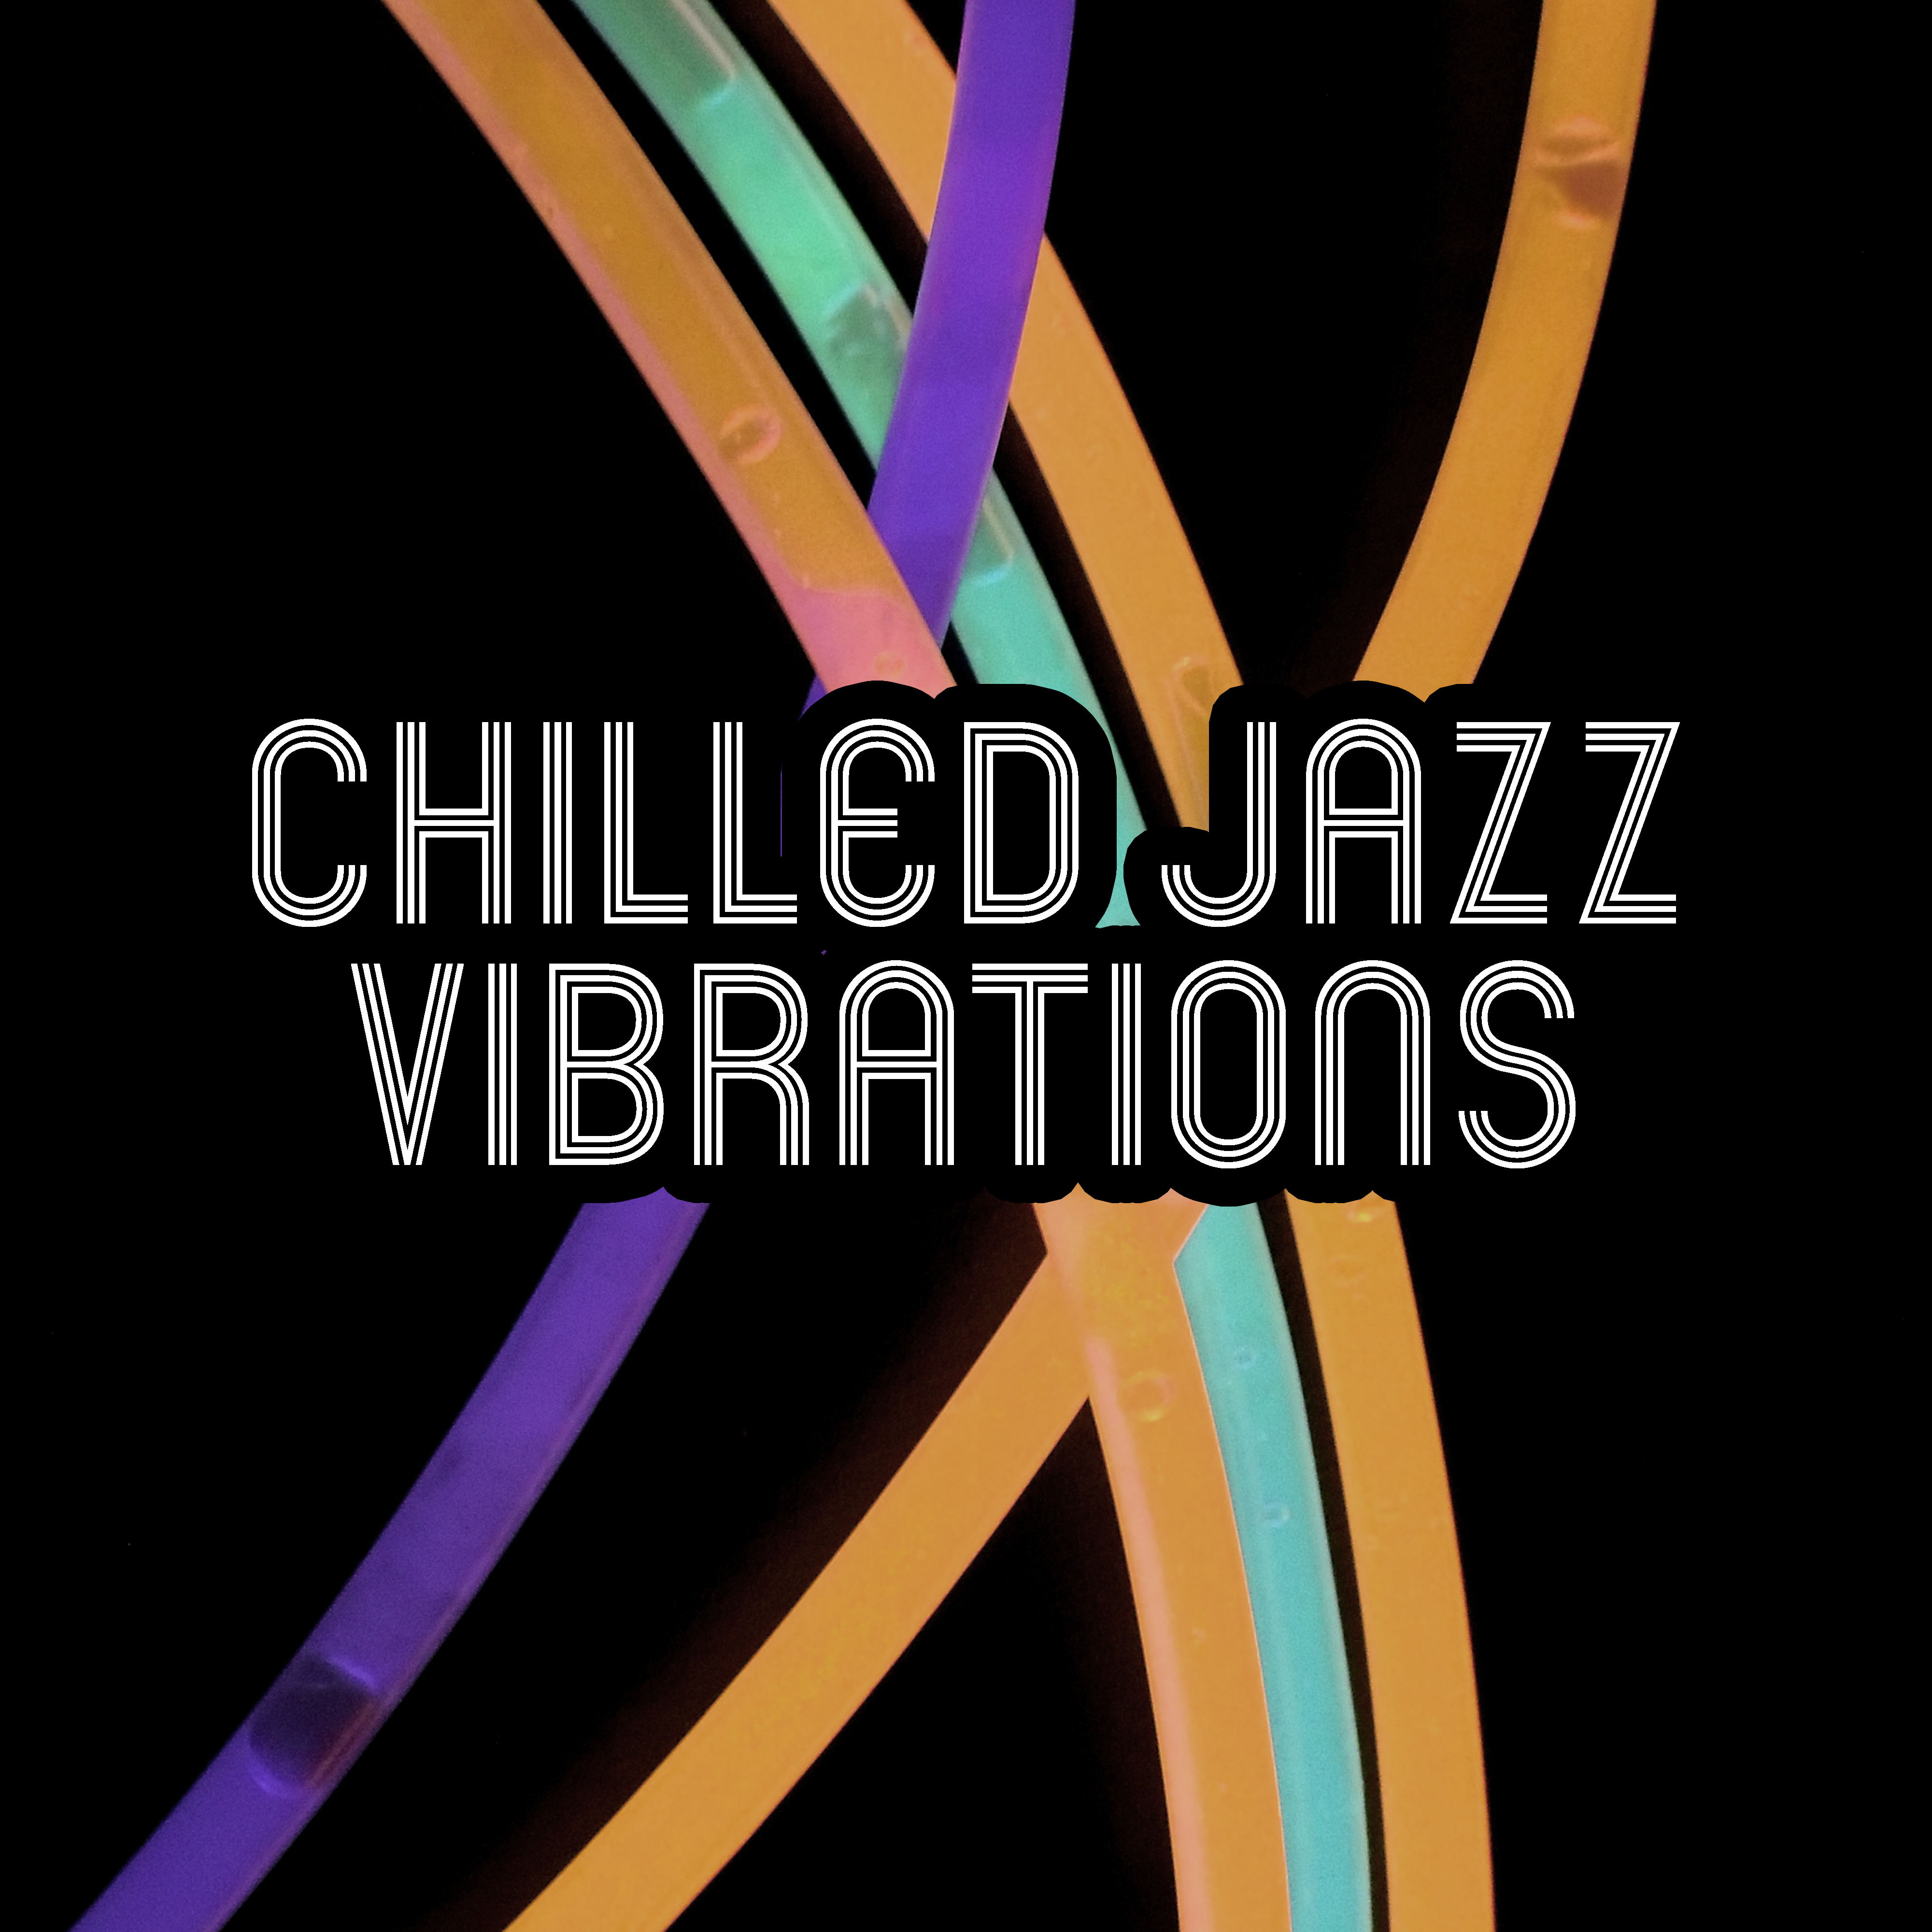 Chilled Jazz Vibrations – Relaxing Jazz Music, Instrumental Piano, Relaxing Evening, Rest